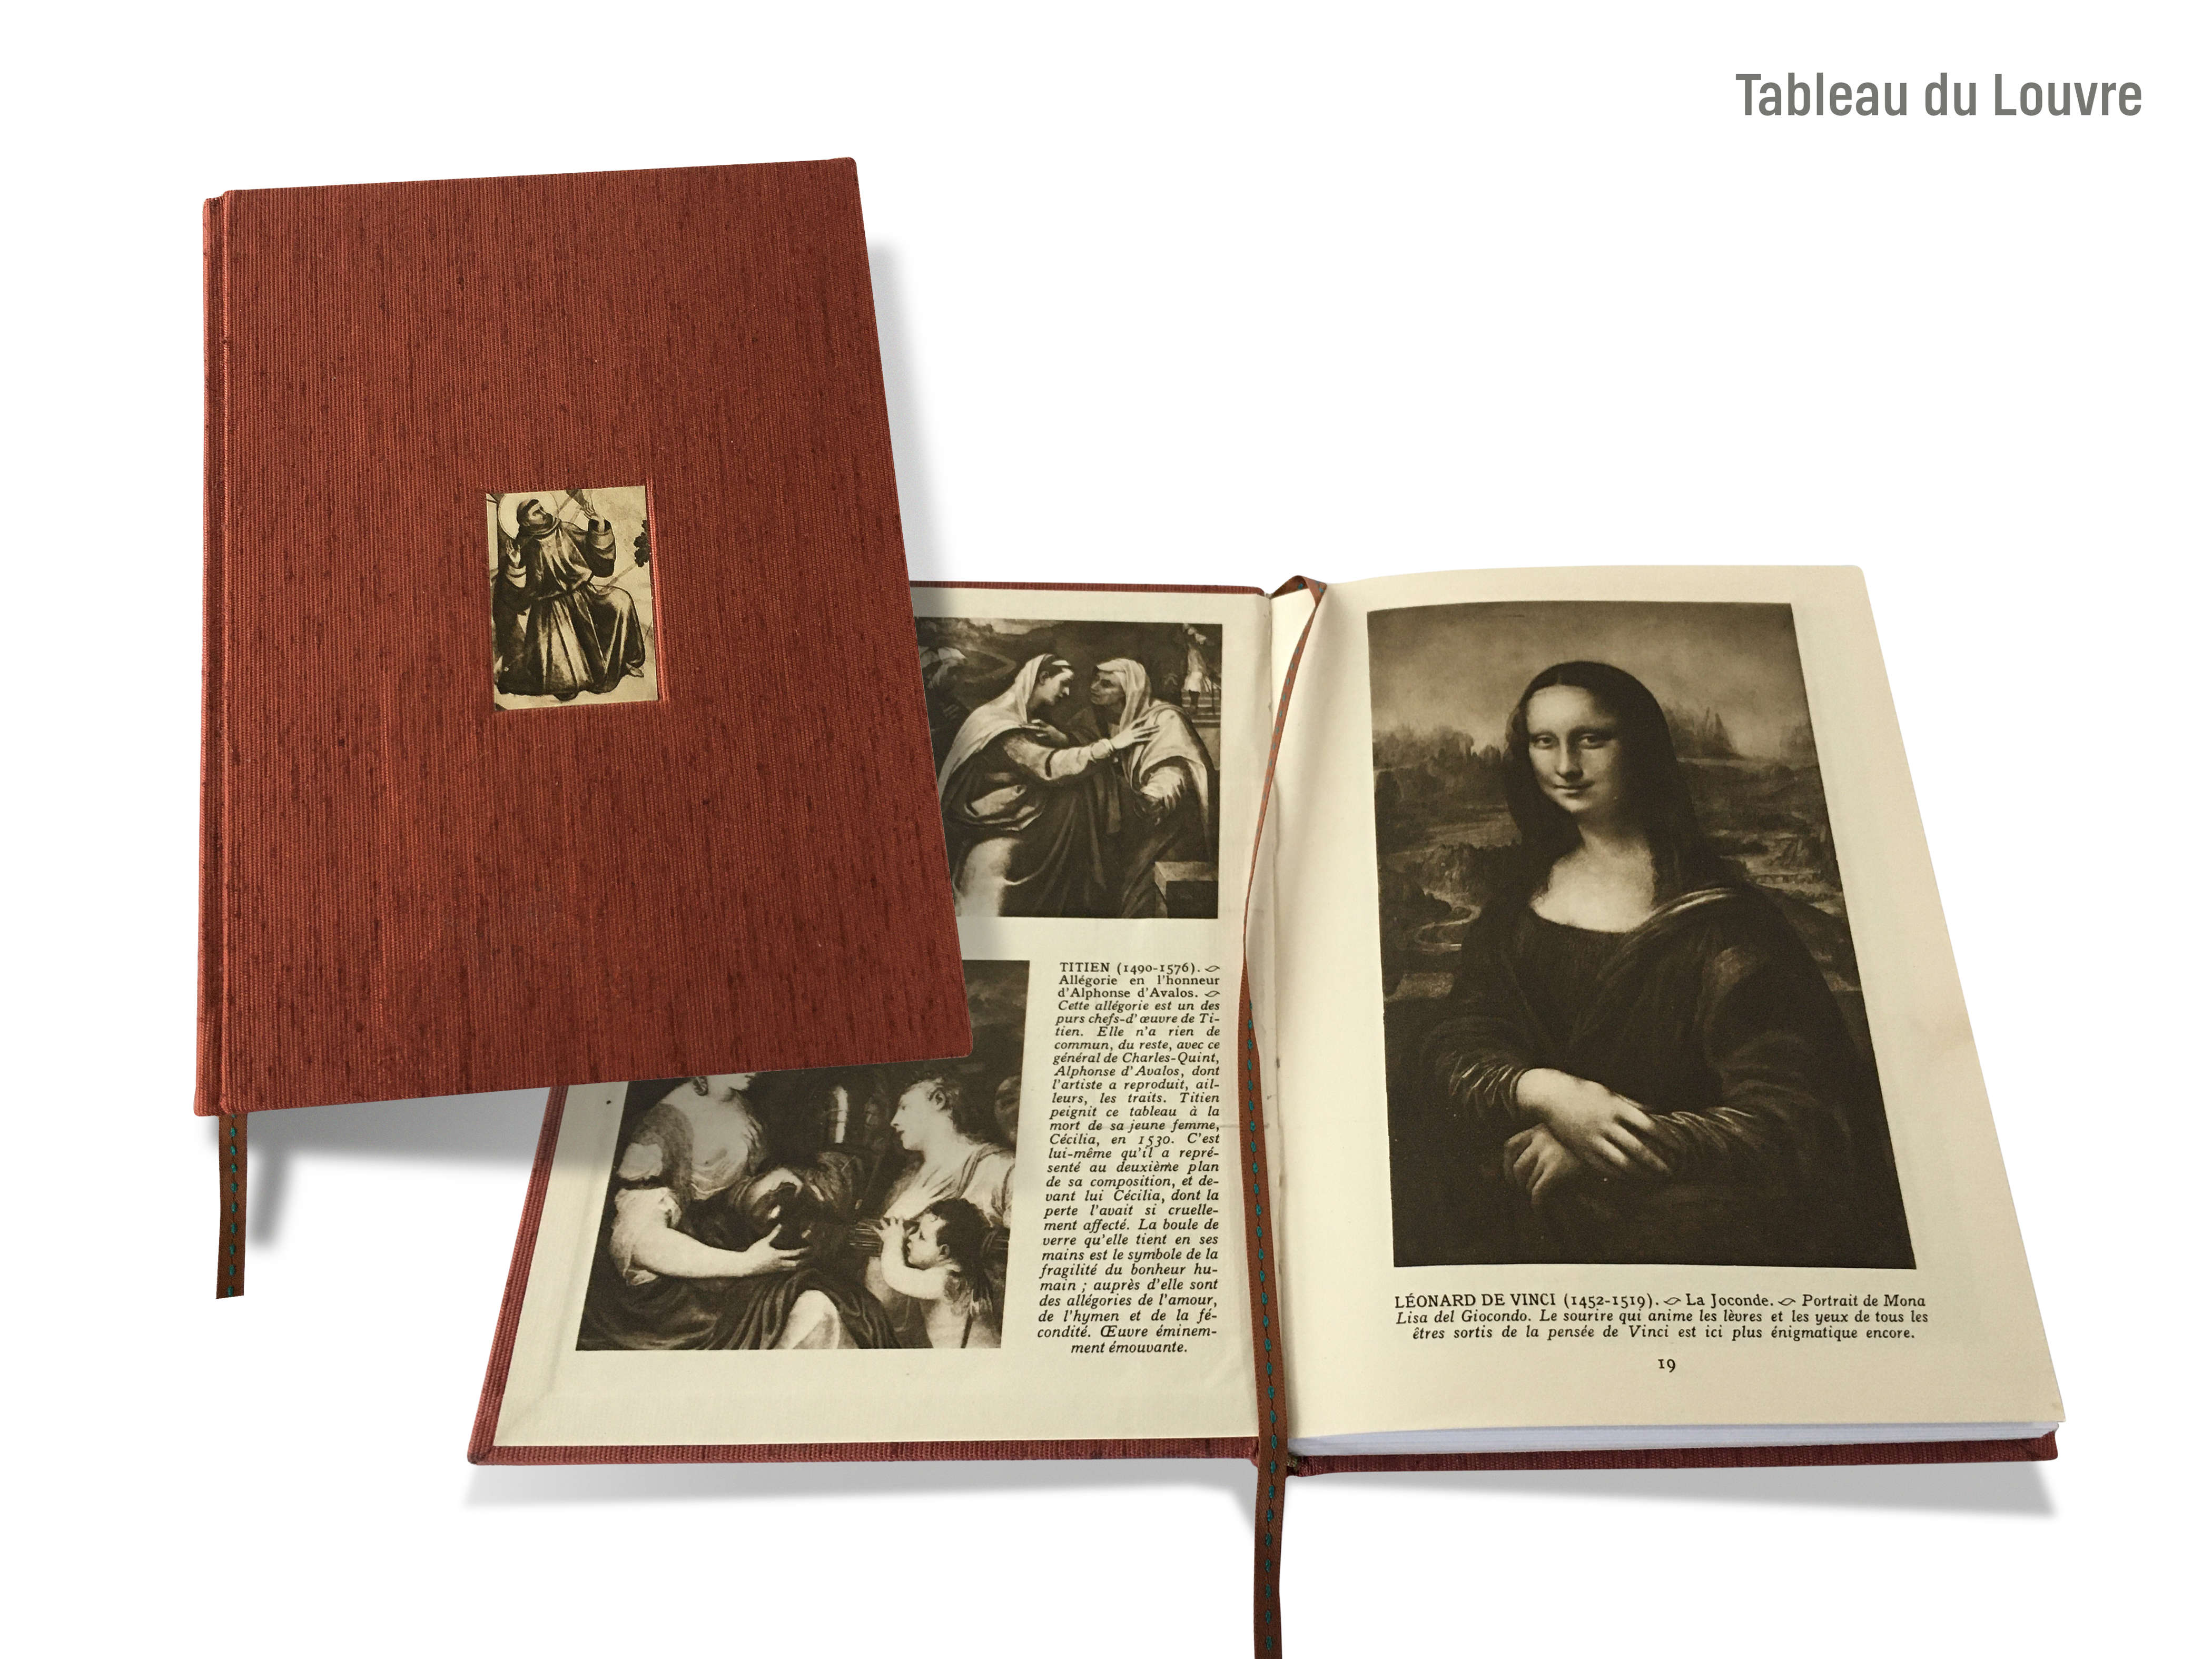 A montage image of a cover and a double-page spread of the hand-made journal titled, ‘Tableau du Louvre’ by Michael Small, featuring a dark red linen cover with a line engraving of a monk and a double-page spread with line engravings of two artworks by Titian and the Mona Lisa by Leonardo de Vinci.